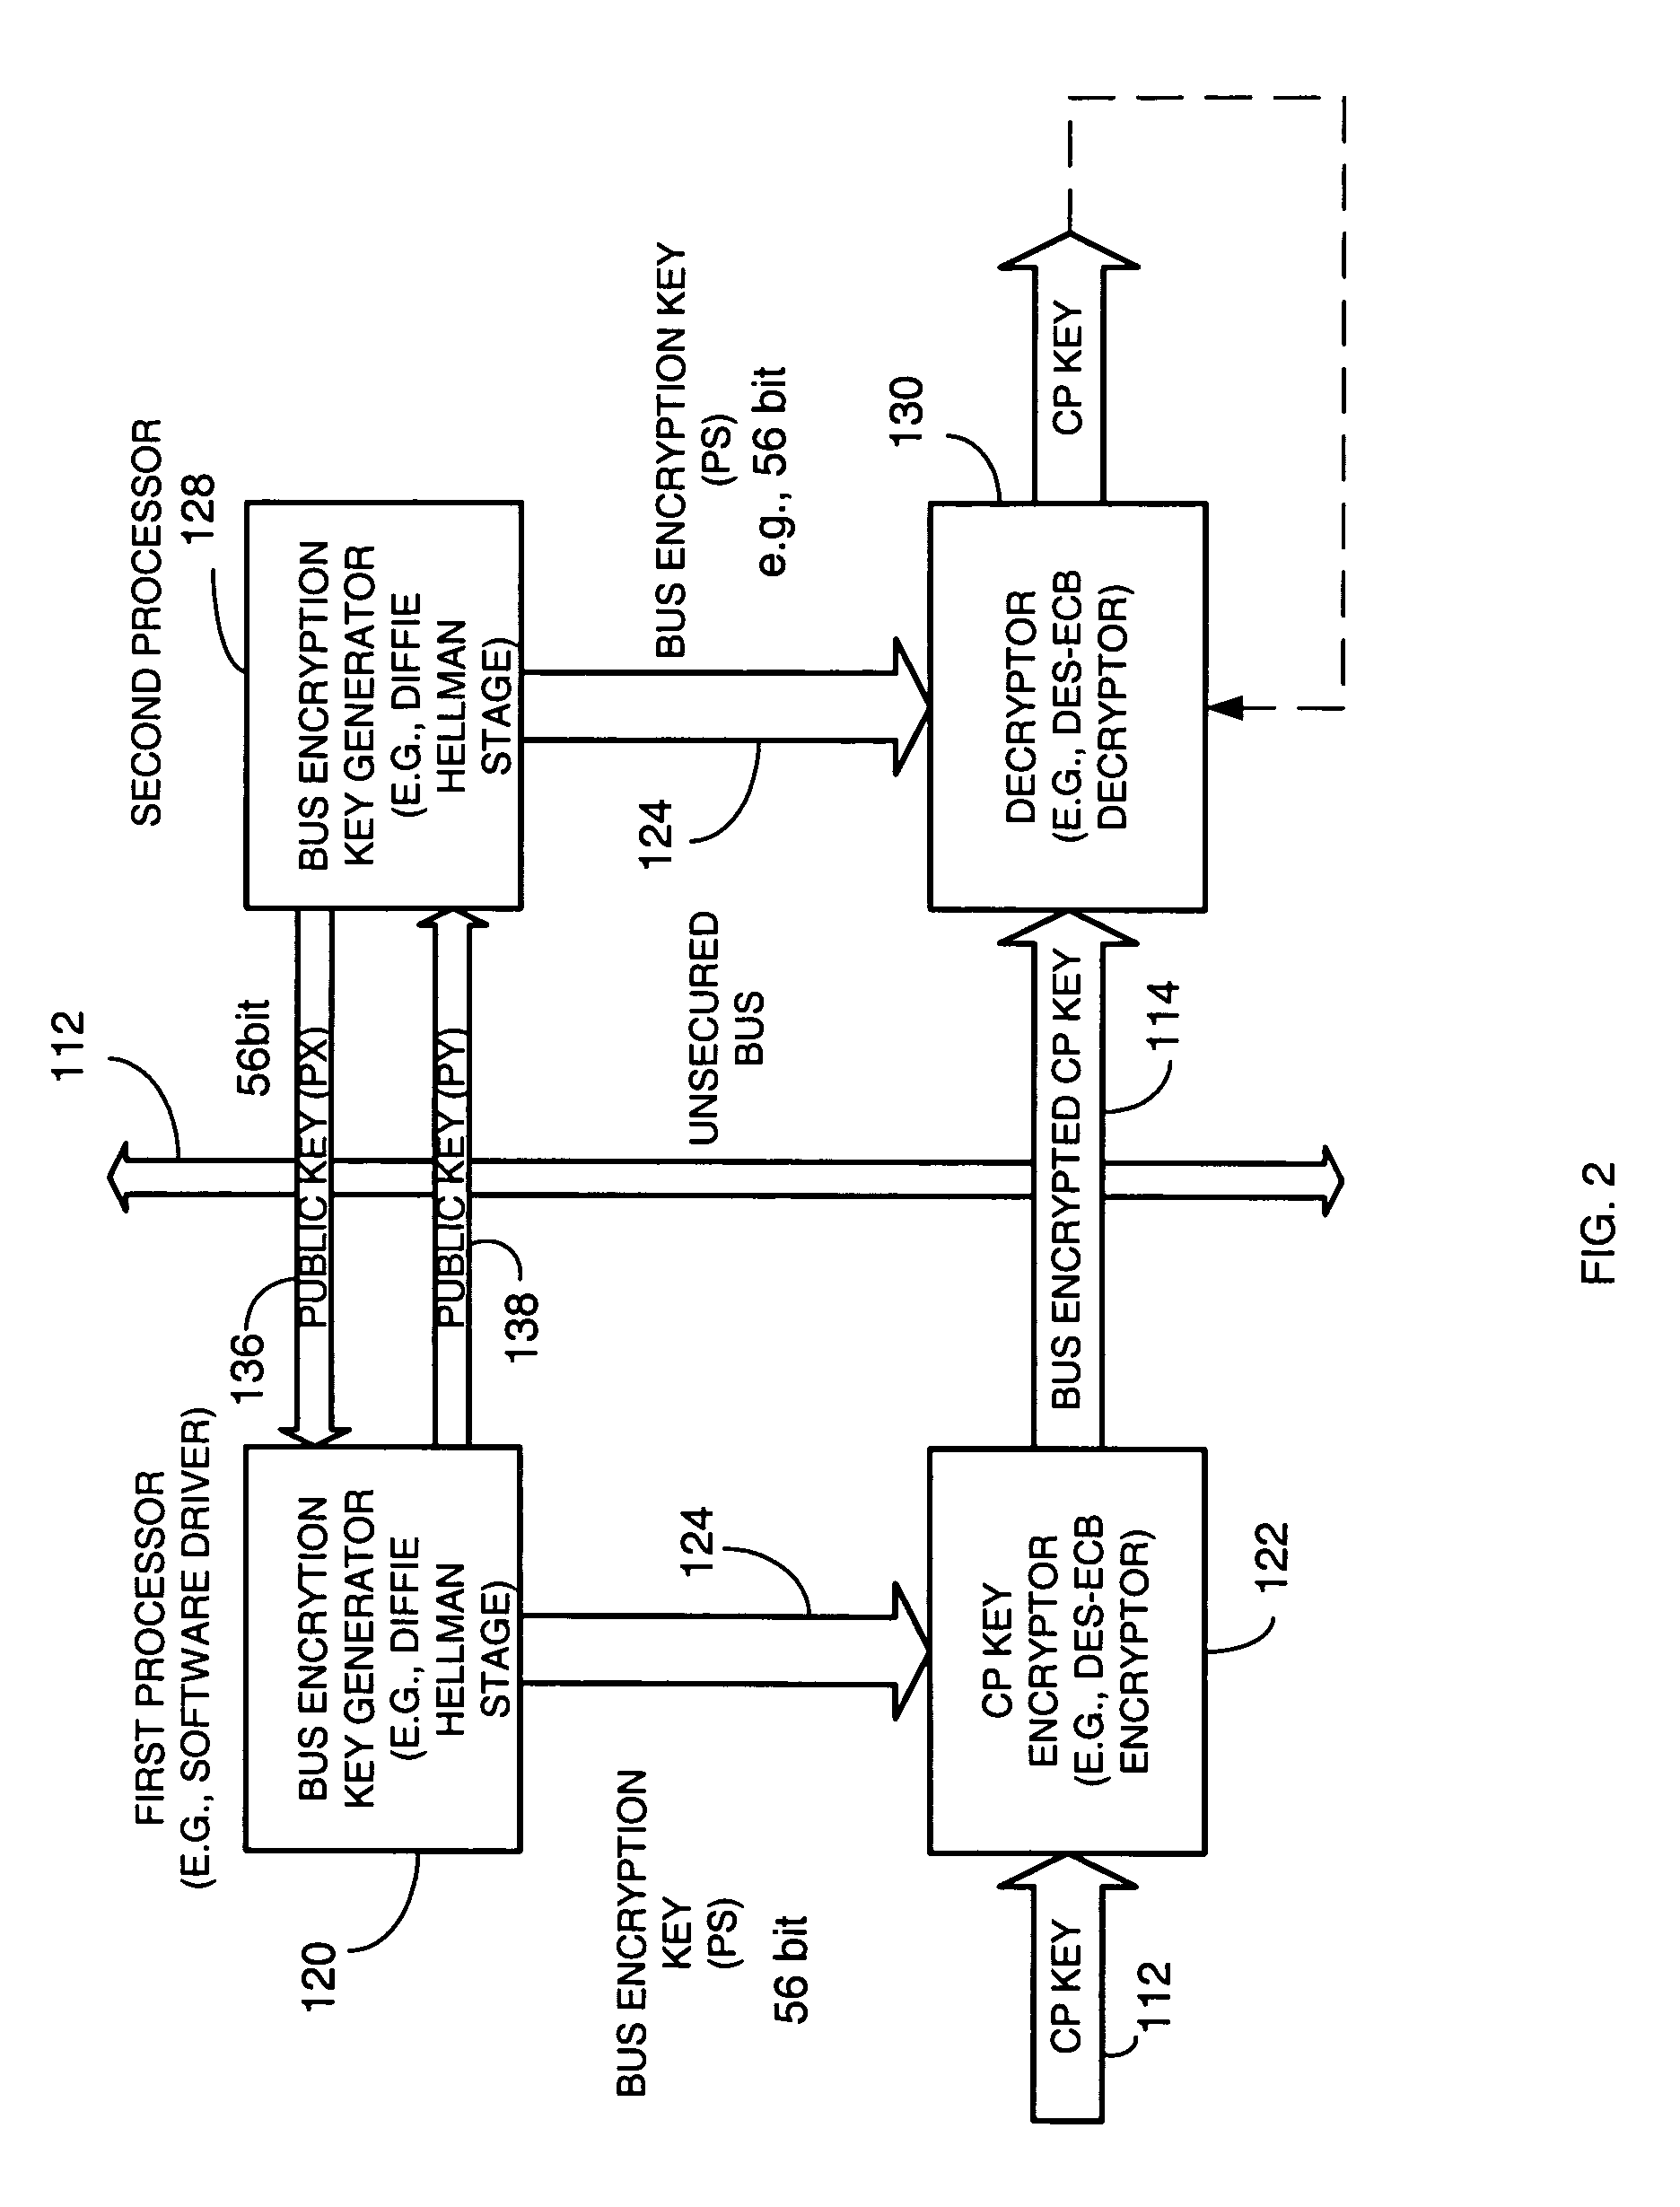 Method and apparatus for providing a bus-encrypted copy protection key to an unsecured bus